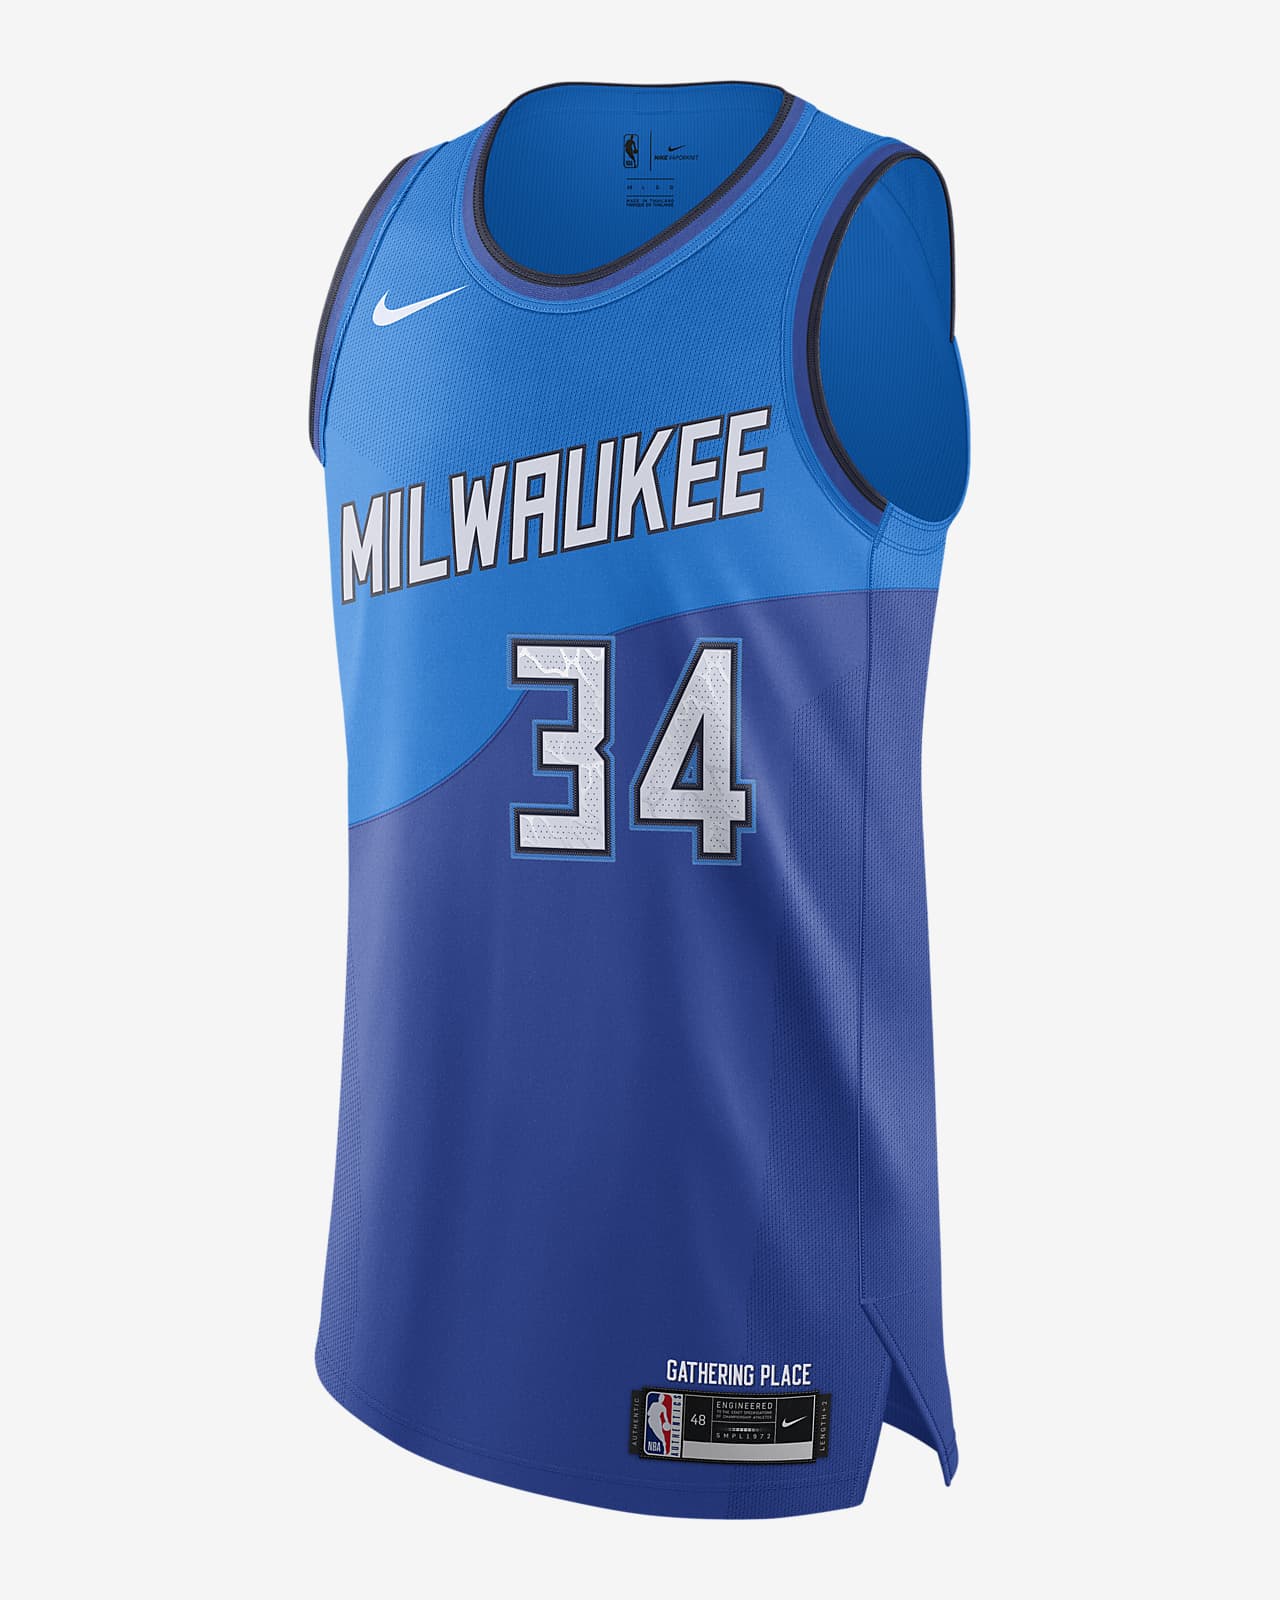 nike authentic jersey nba